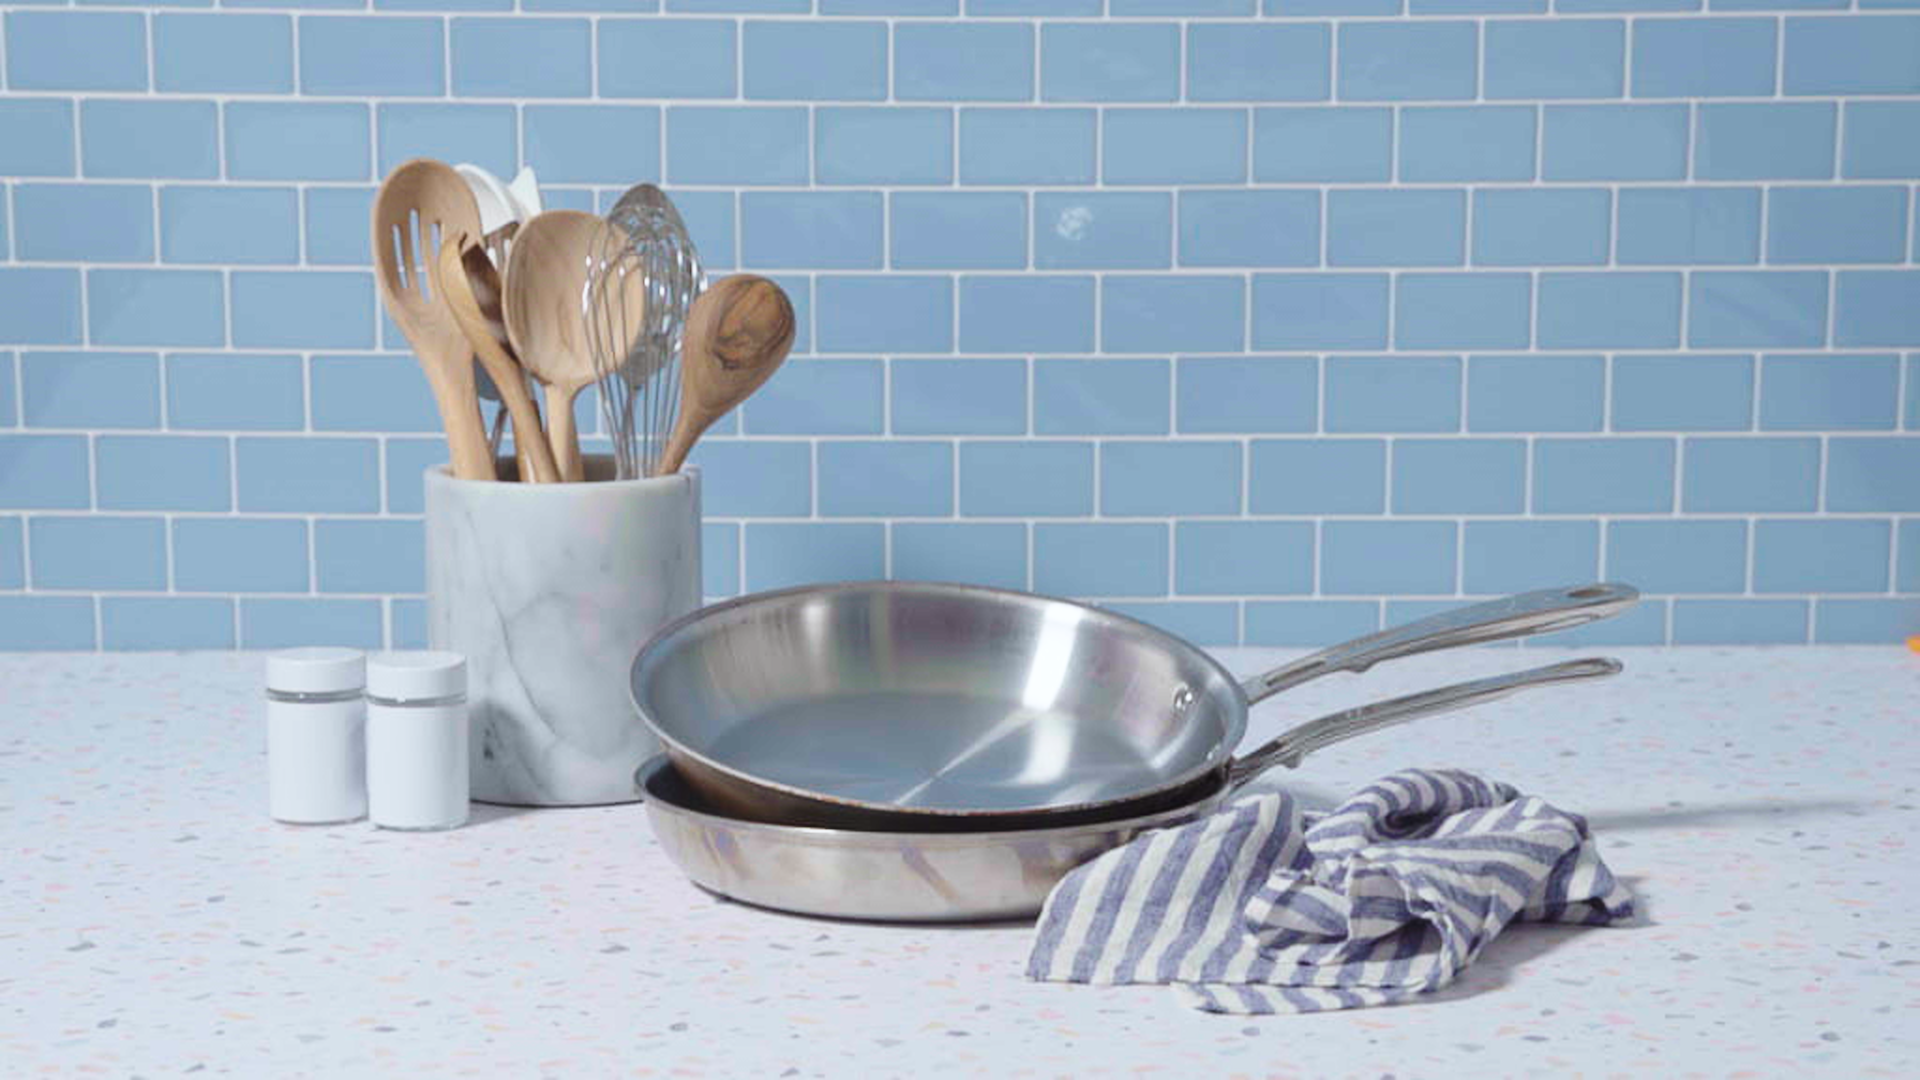 How to Clean Stainless Steel Pans, According to Cleaning Experts